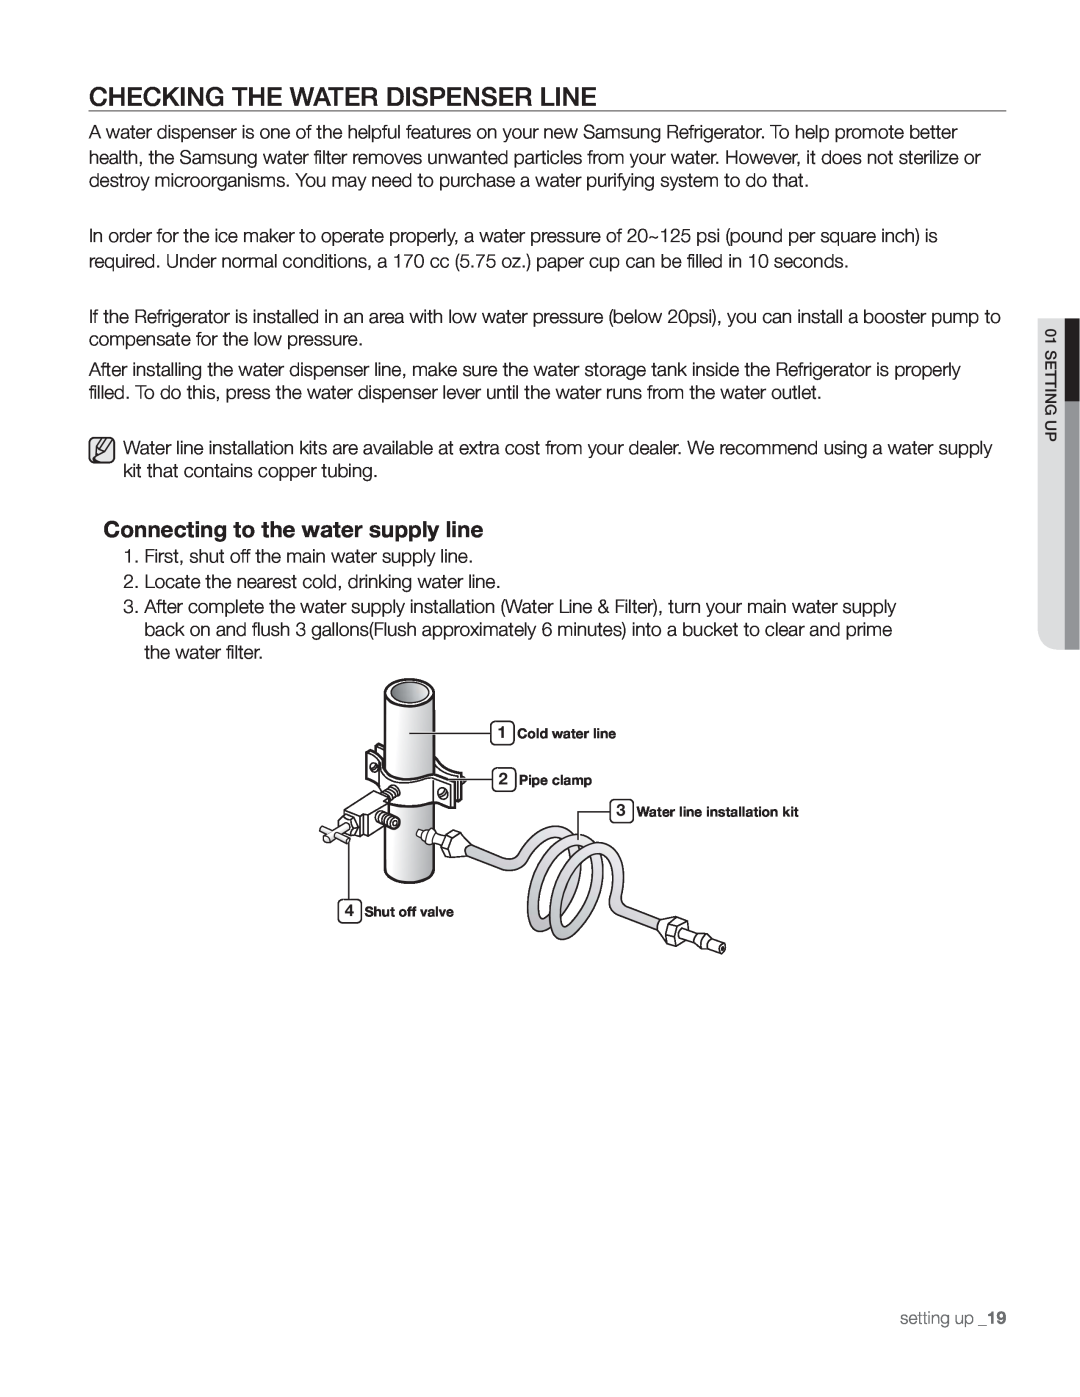 Samsung DA68-01890Q user manual Checking The Water Dispenser Line, Connecting to the water supply line 